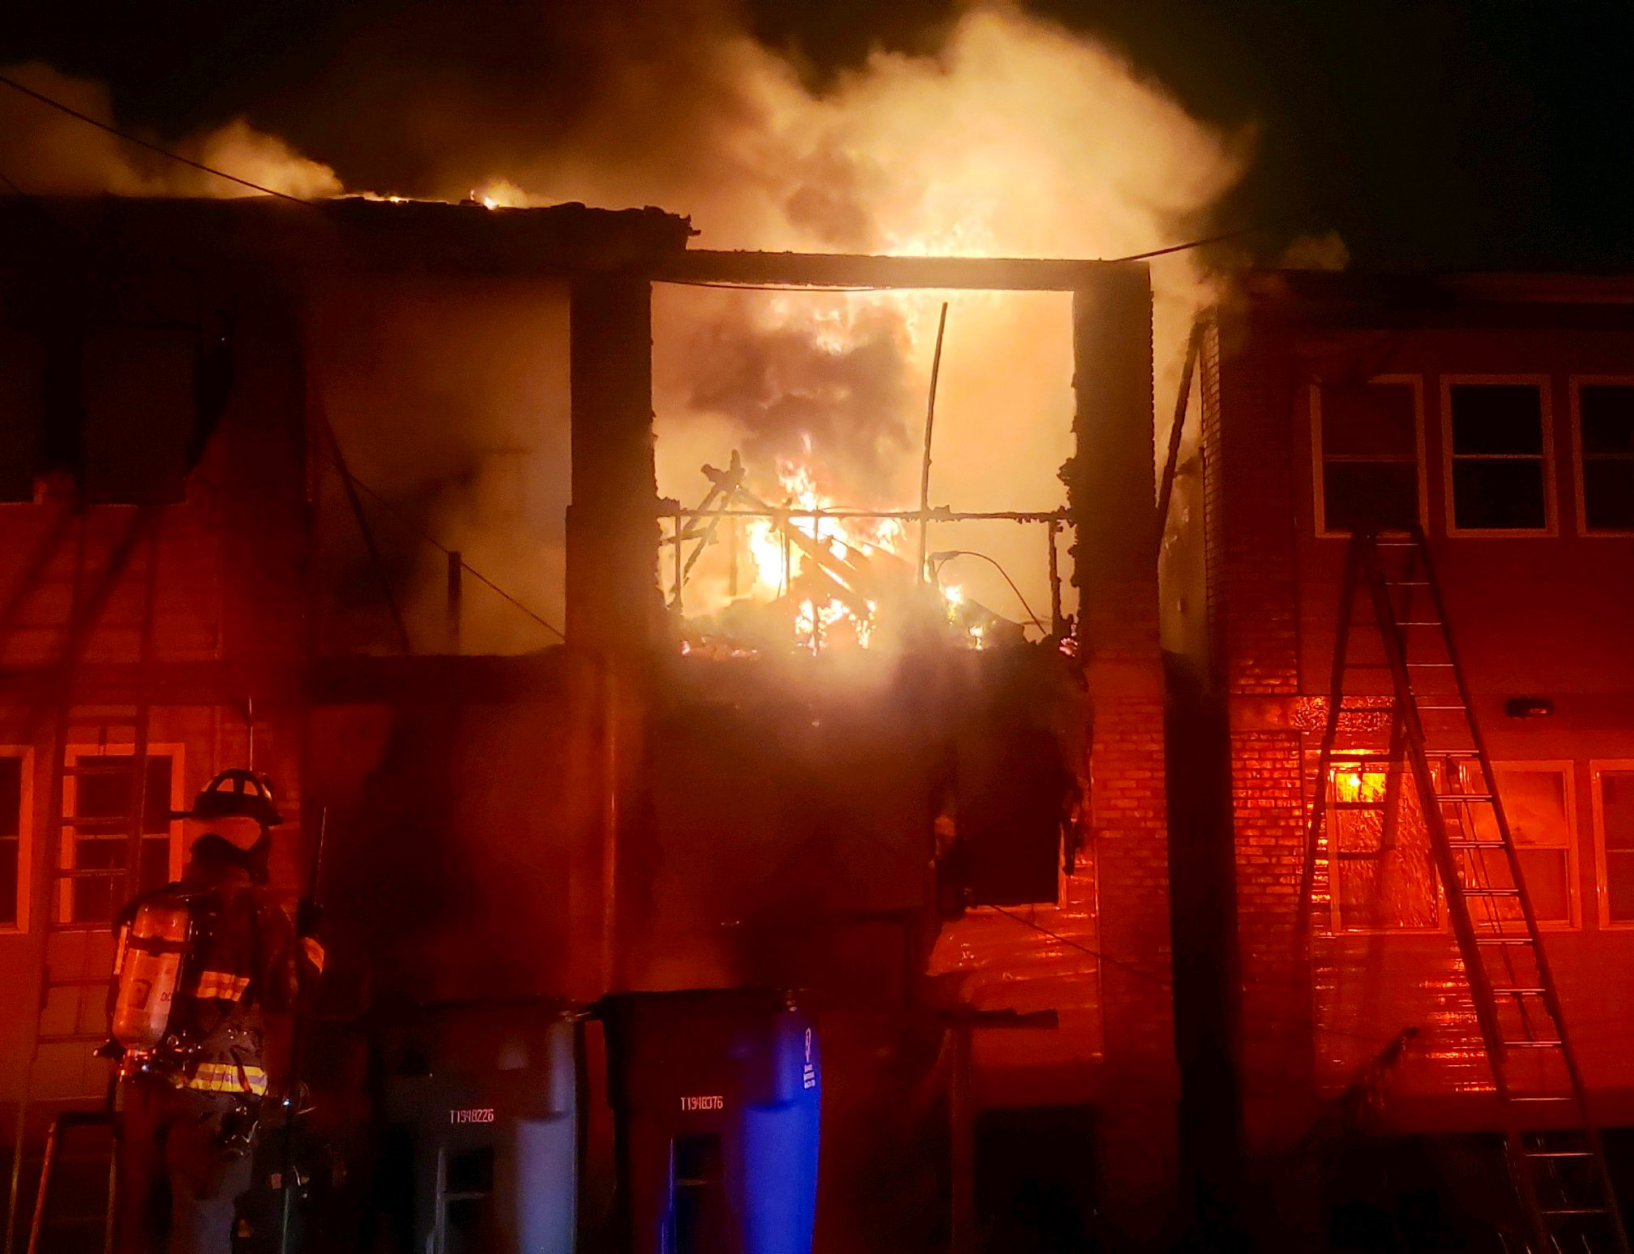 The fire broke out before 4:30 a.m. on Wednesday morning. (Photo from DC Fire and EMS)